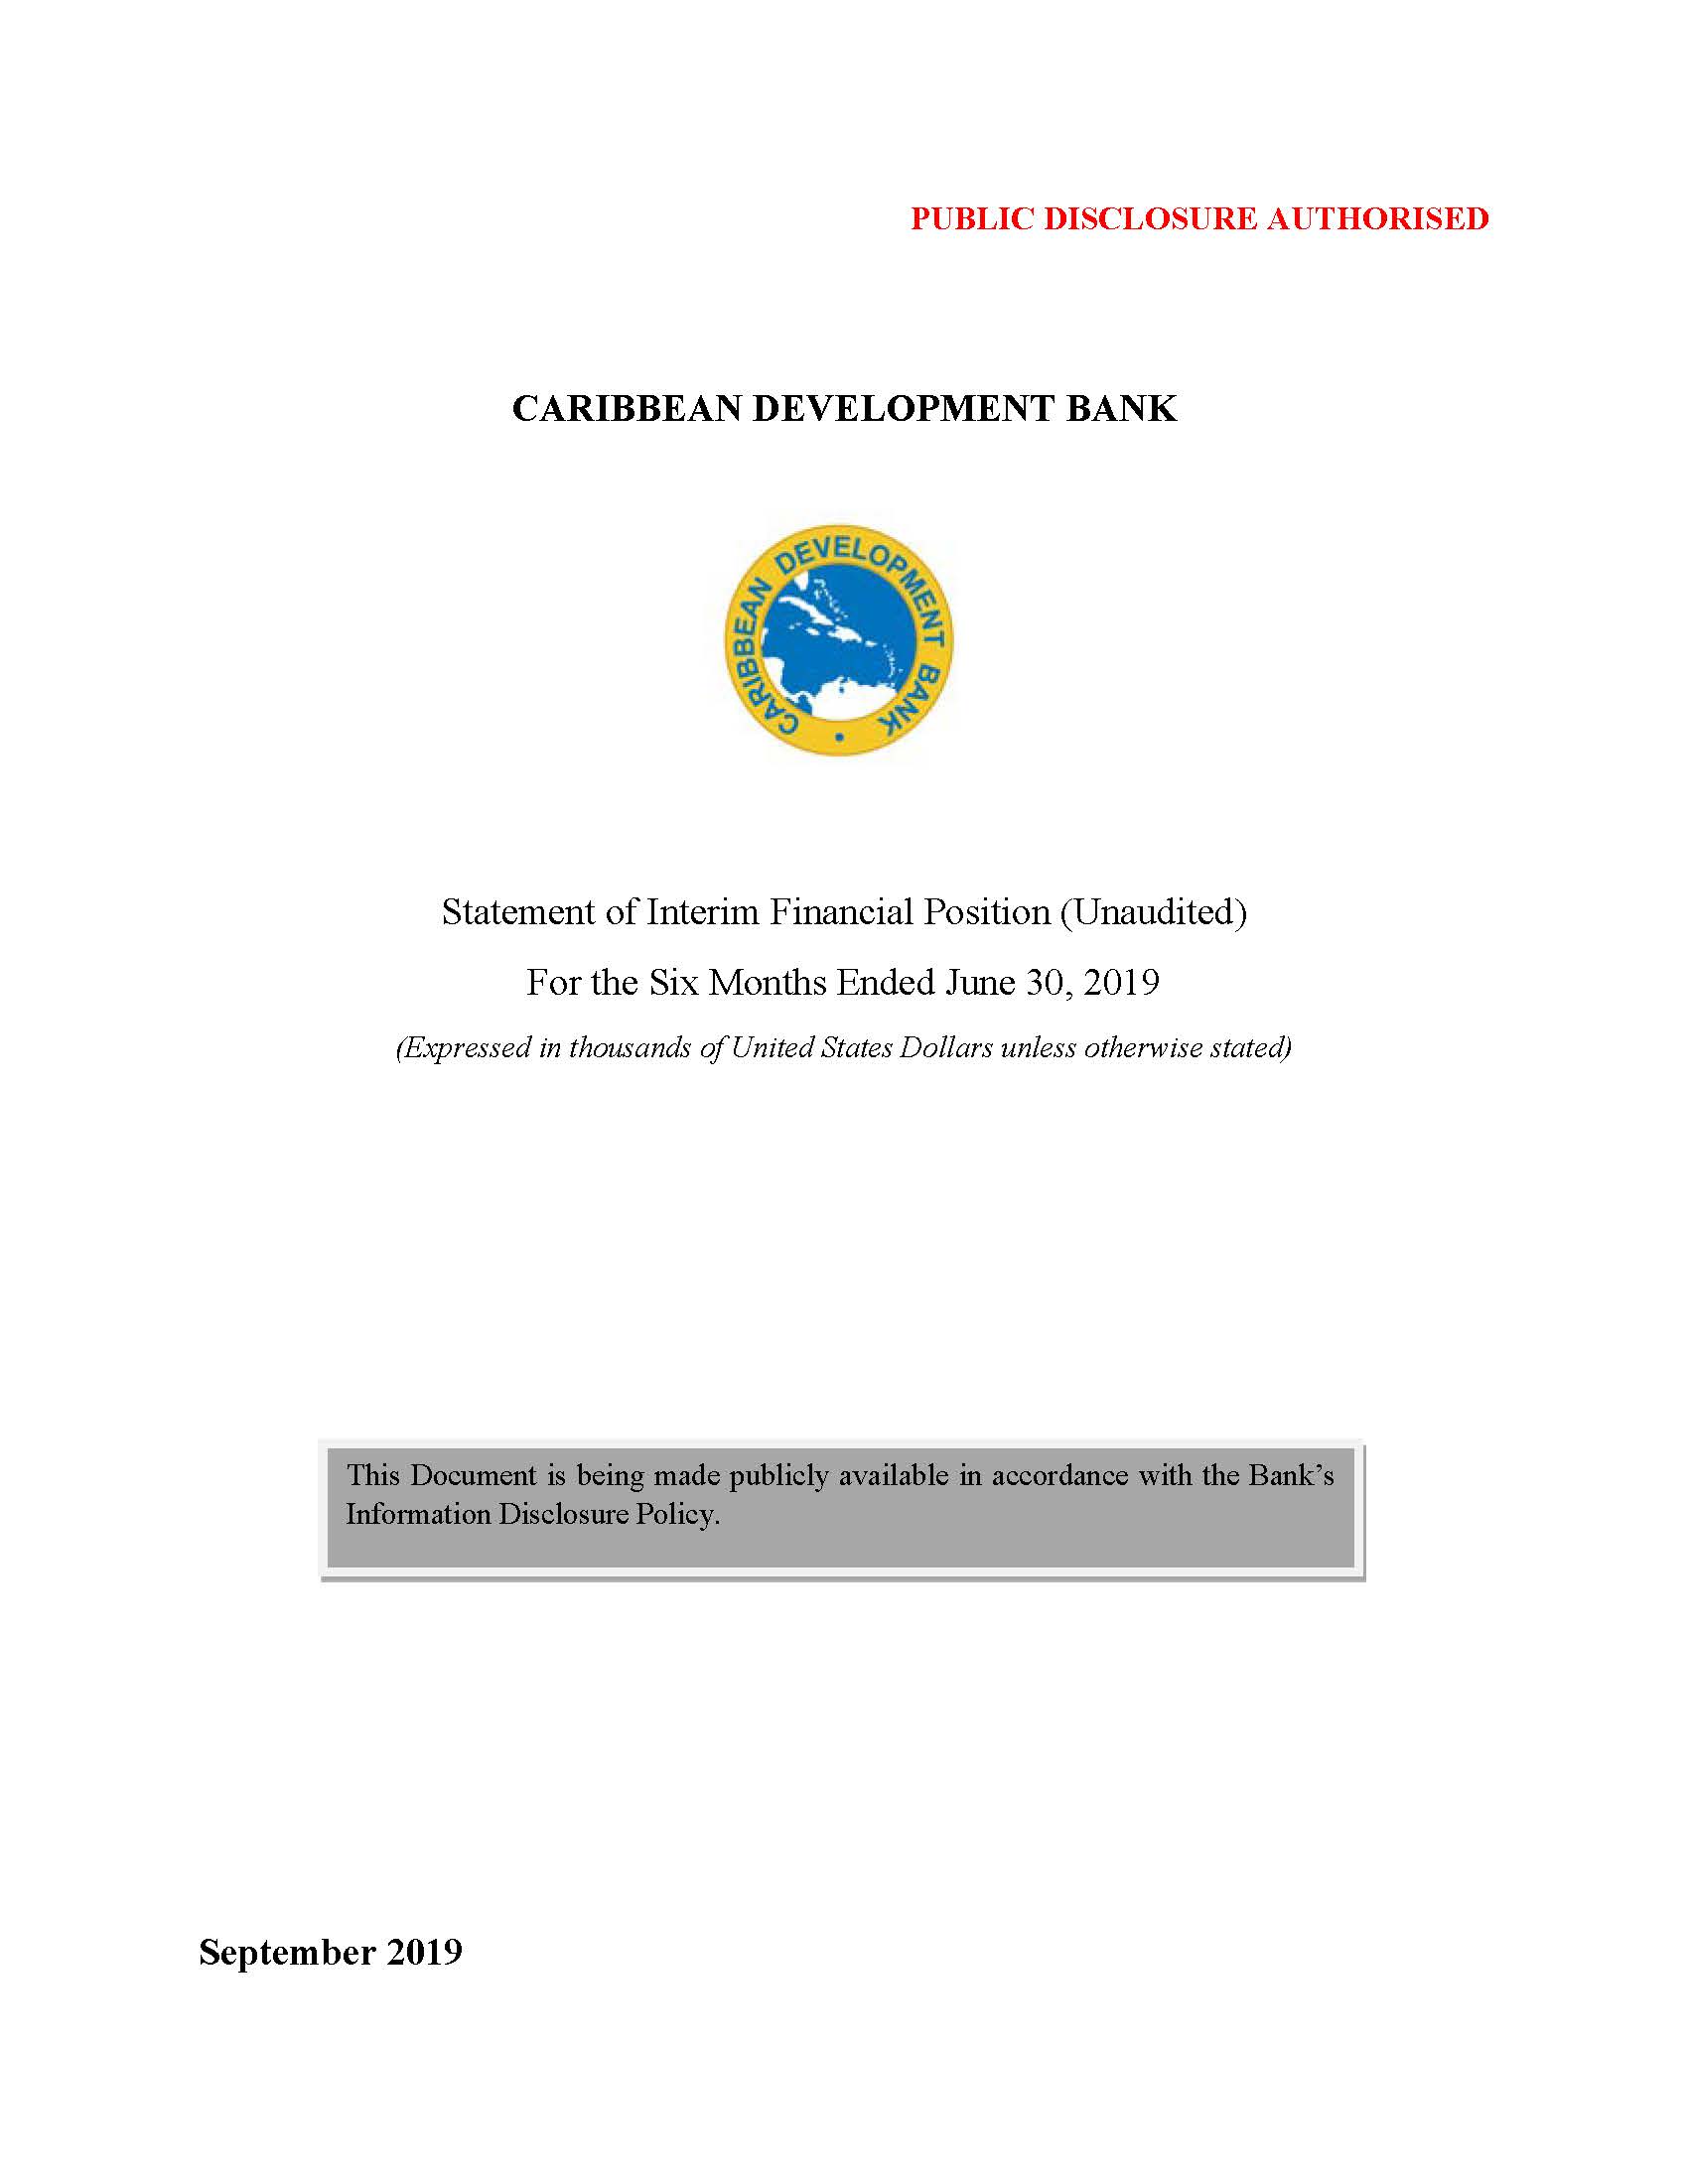 Text based cover featuring document title and CDB logo